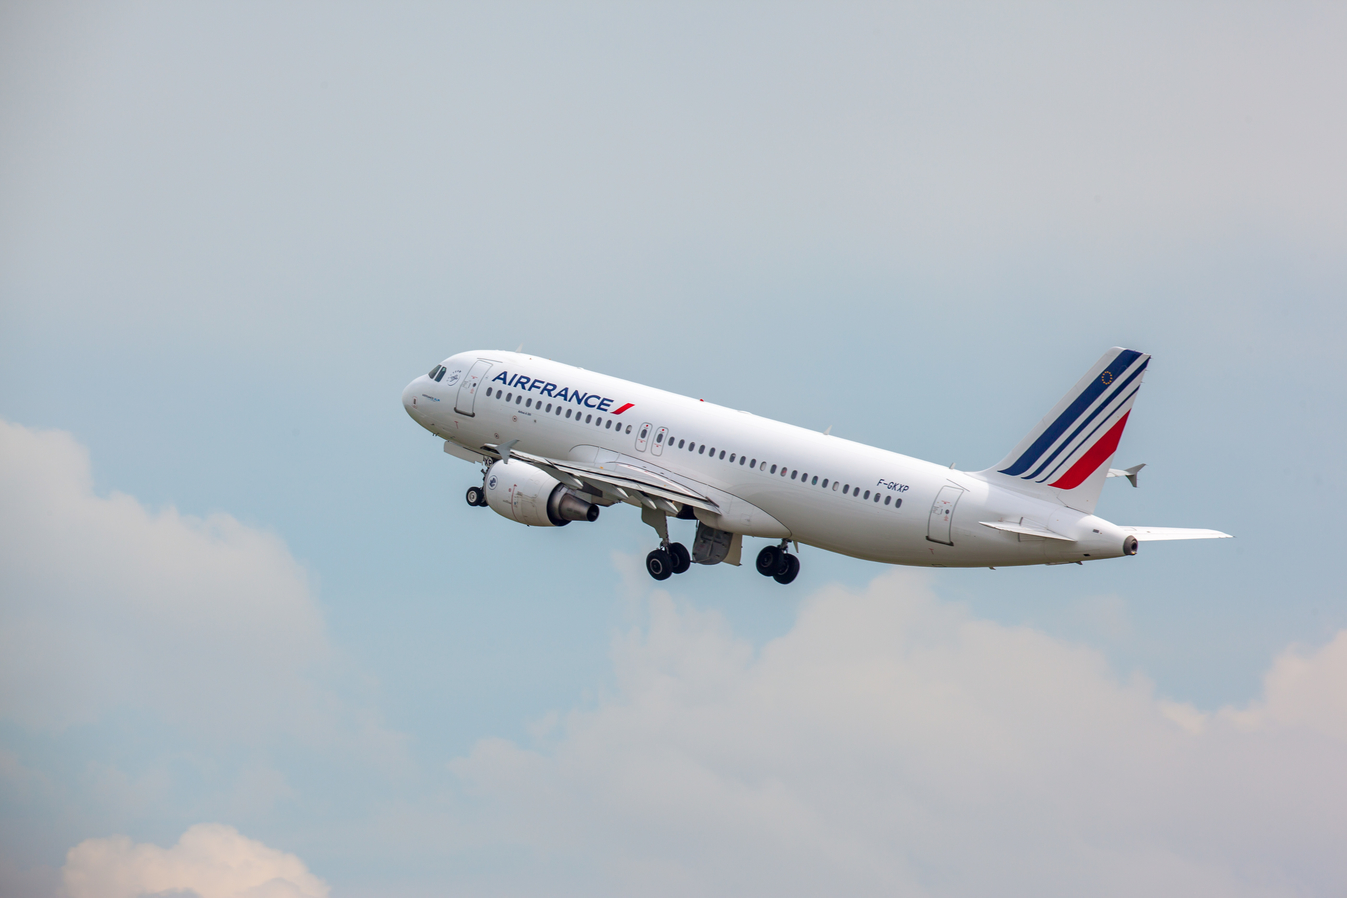 Travel Advisory: Air France confirms Flights to continue operating Between Paris and Johannesburg